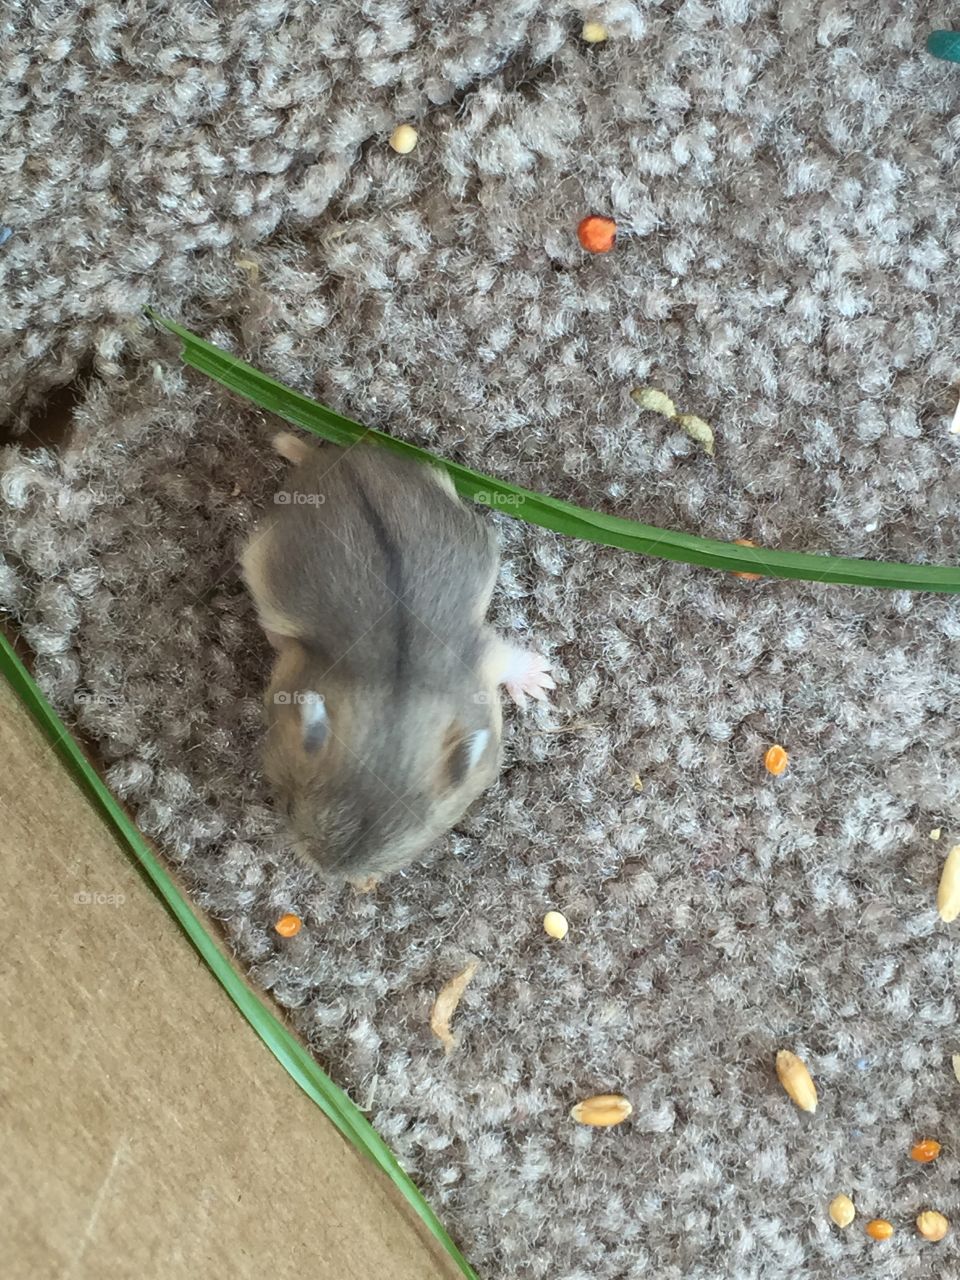 Hamster on the move. Letting the hamsters out to play, this little guy loved the grass we set in the box for him